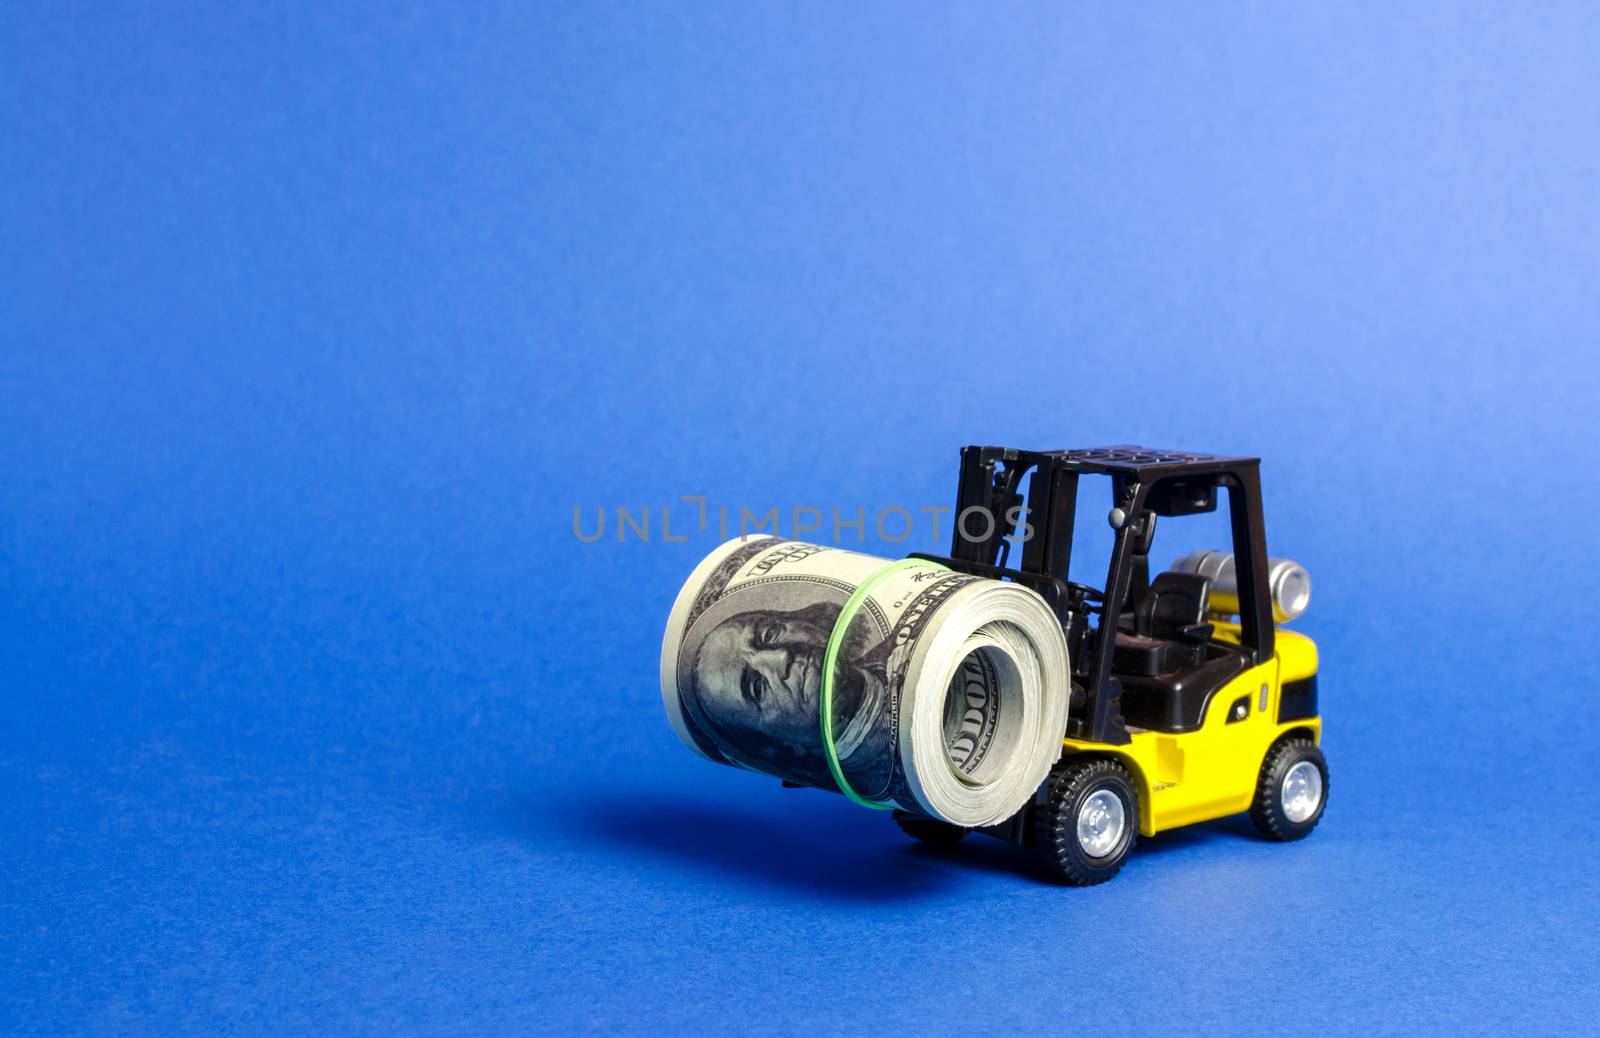 Forklift truck carries a bundle of dollars. Attracting direct investment in business and production, improving economic performance. capitalism. Export of capital, offshore economic zones. by iLixe48